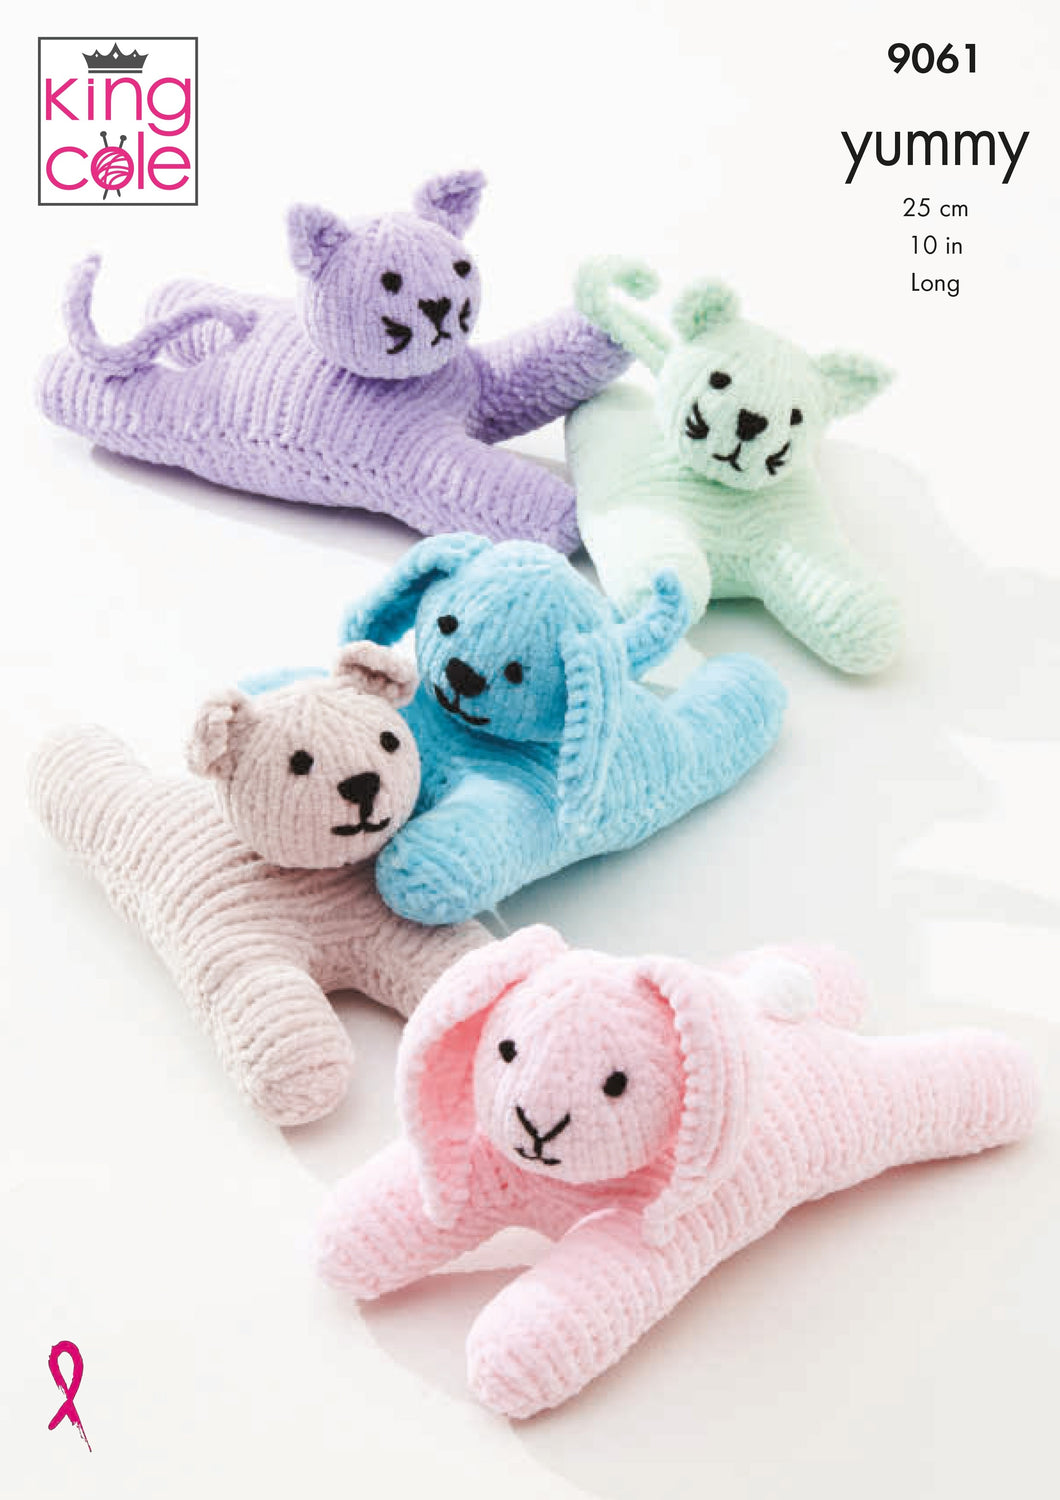 King Cole YUMMY KNITTING PATTERNS - 9061 Cats and Dogs